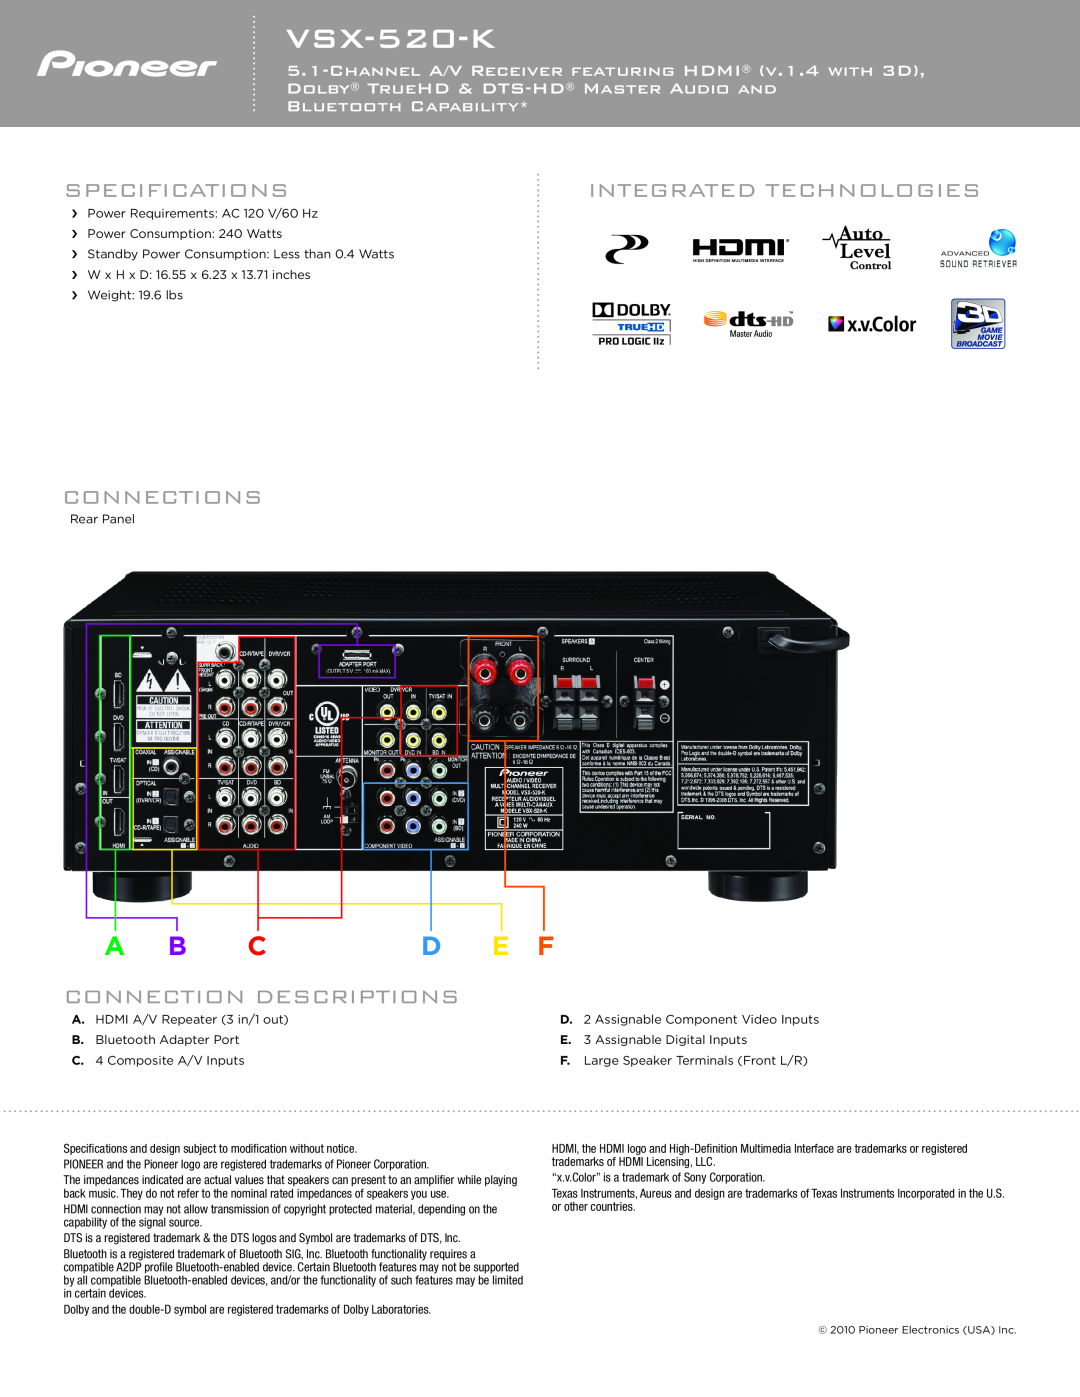 Pioneer VSX-520-K manual Specifications, Integrated Technologies, Connections, Connection Descriptions, A B C D E F 